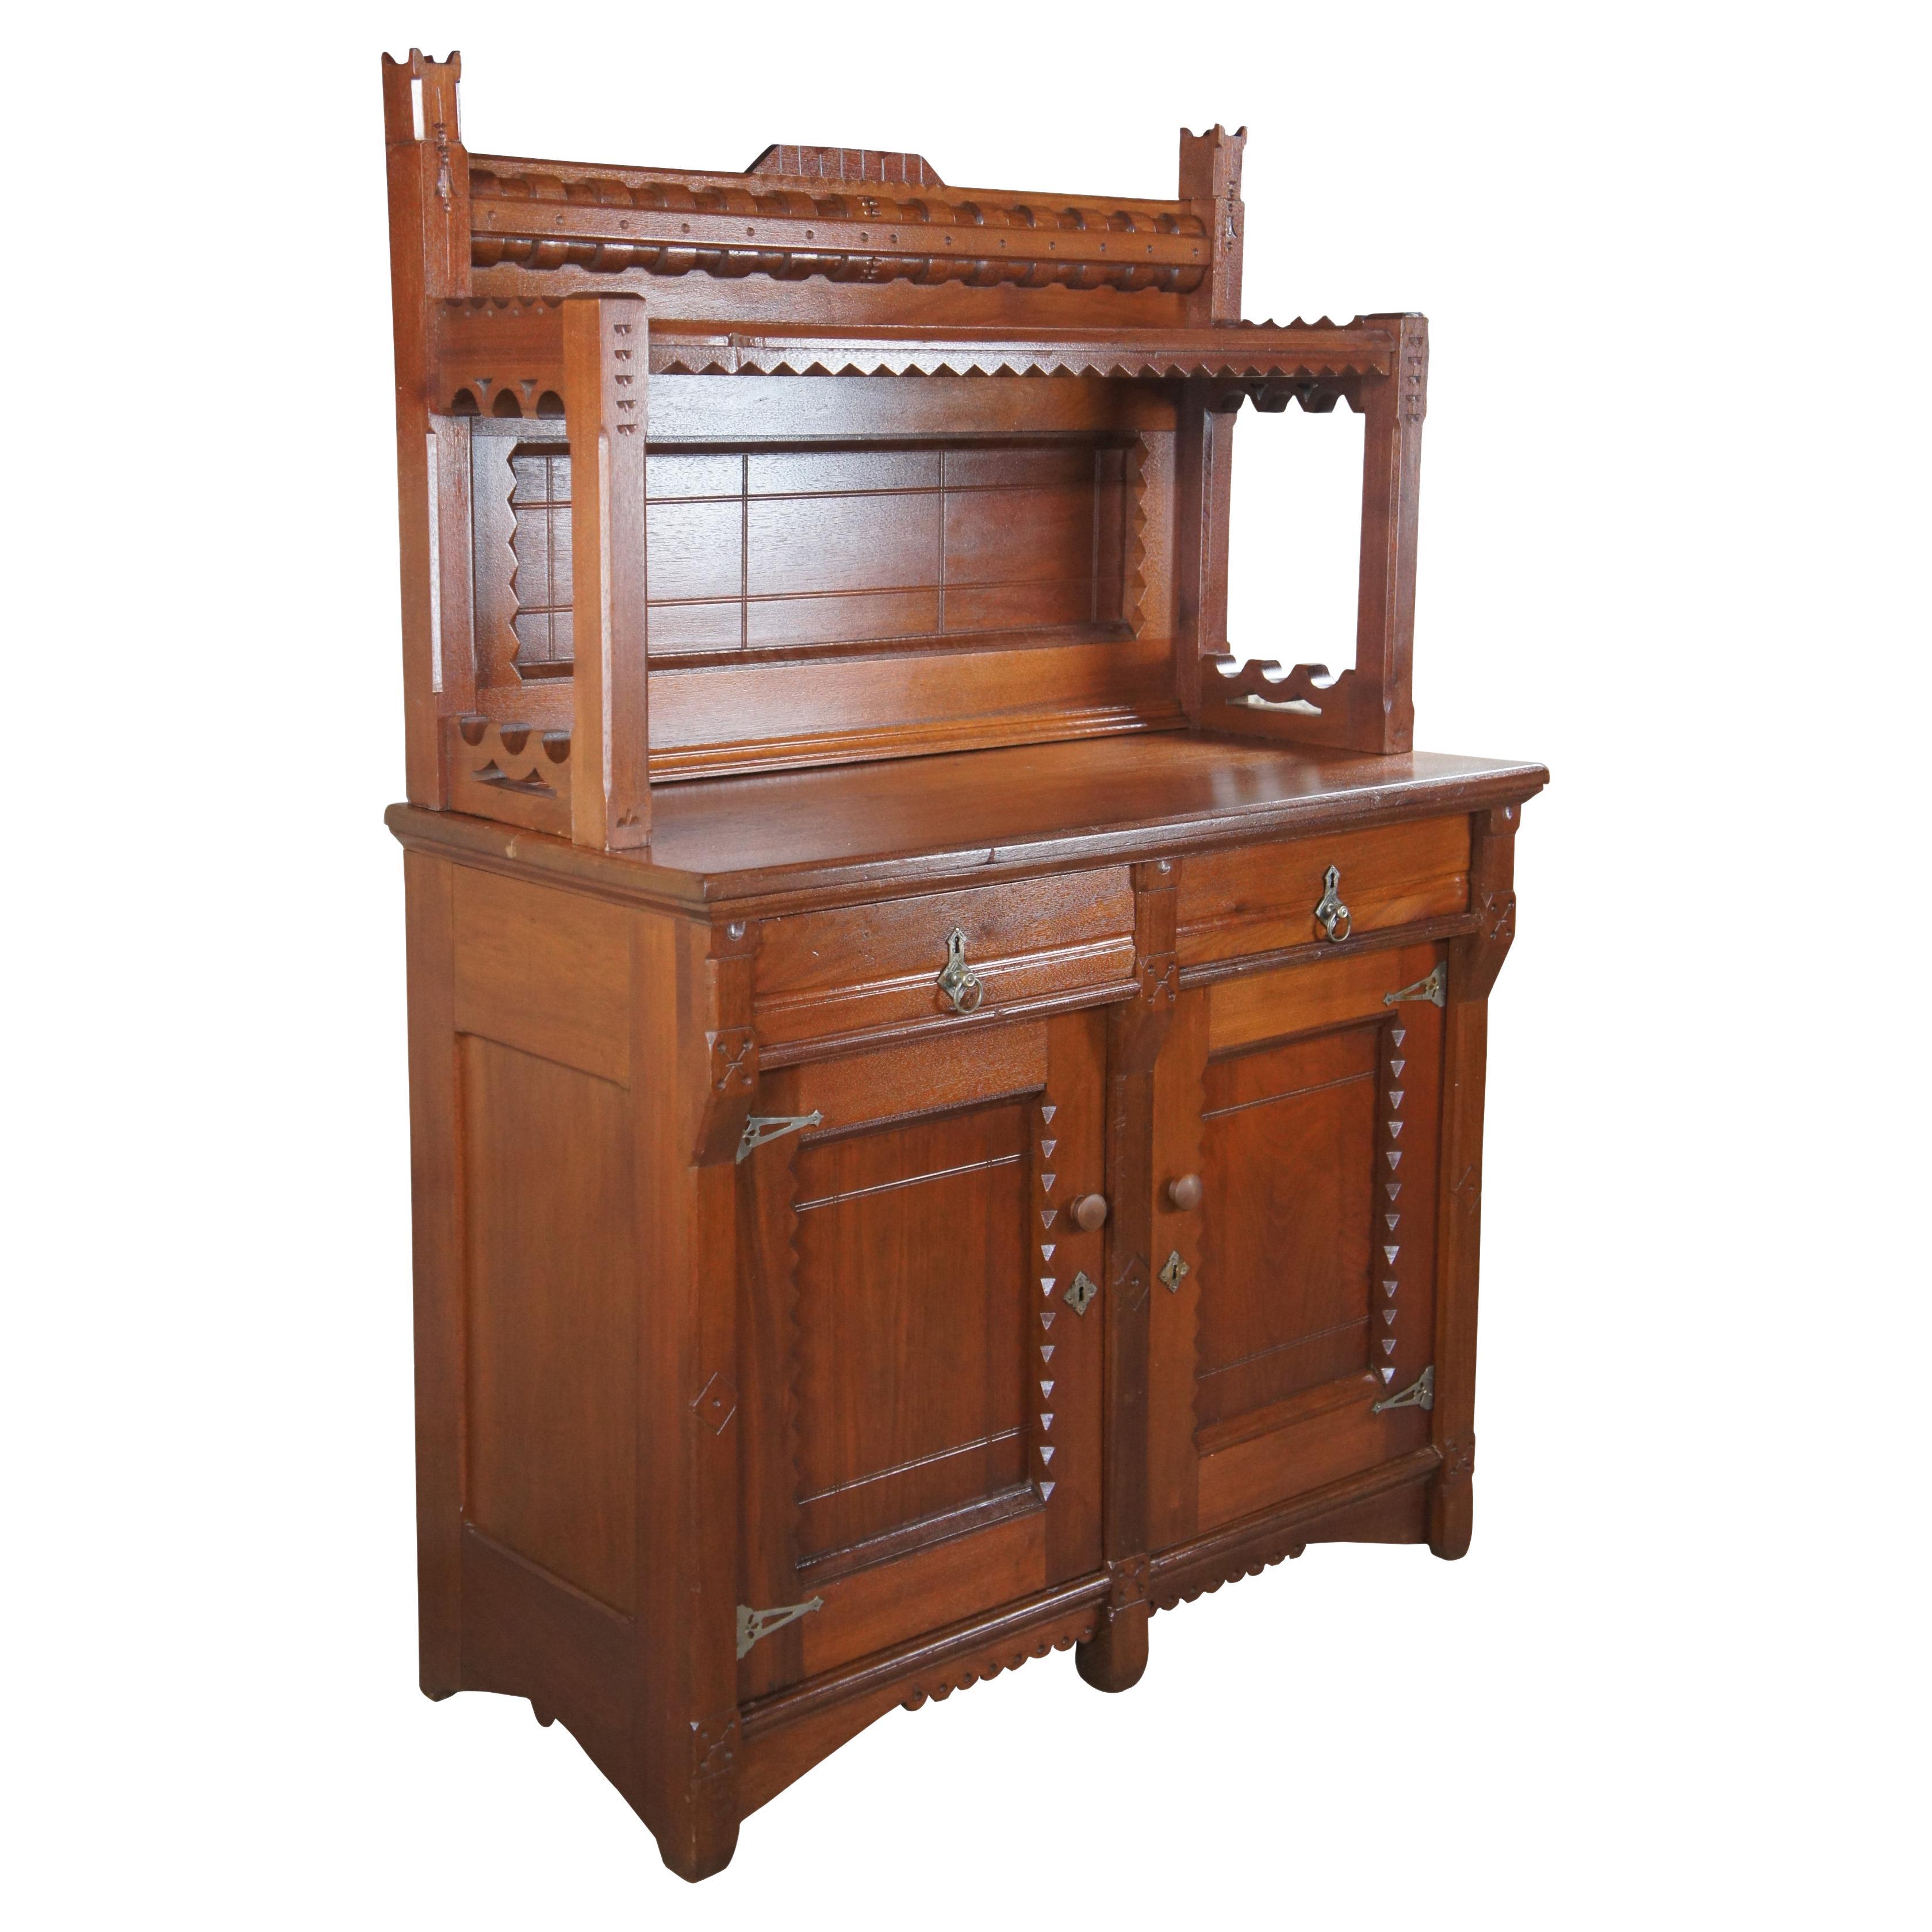 A beautiful Victorian era Eastlake sideboard, server or dry bar. Made from walnut with a uniquely carved backsplash featuring sawtooth and contoured molding. The paneled backing can be removed and replaced with a mirror. The base features two hand